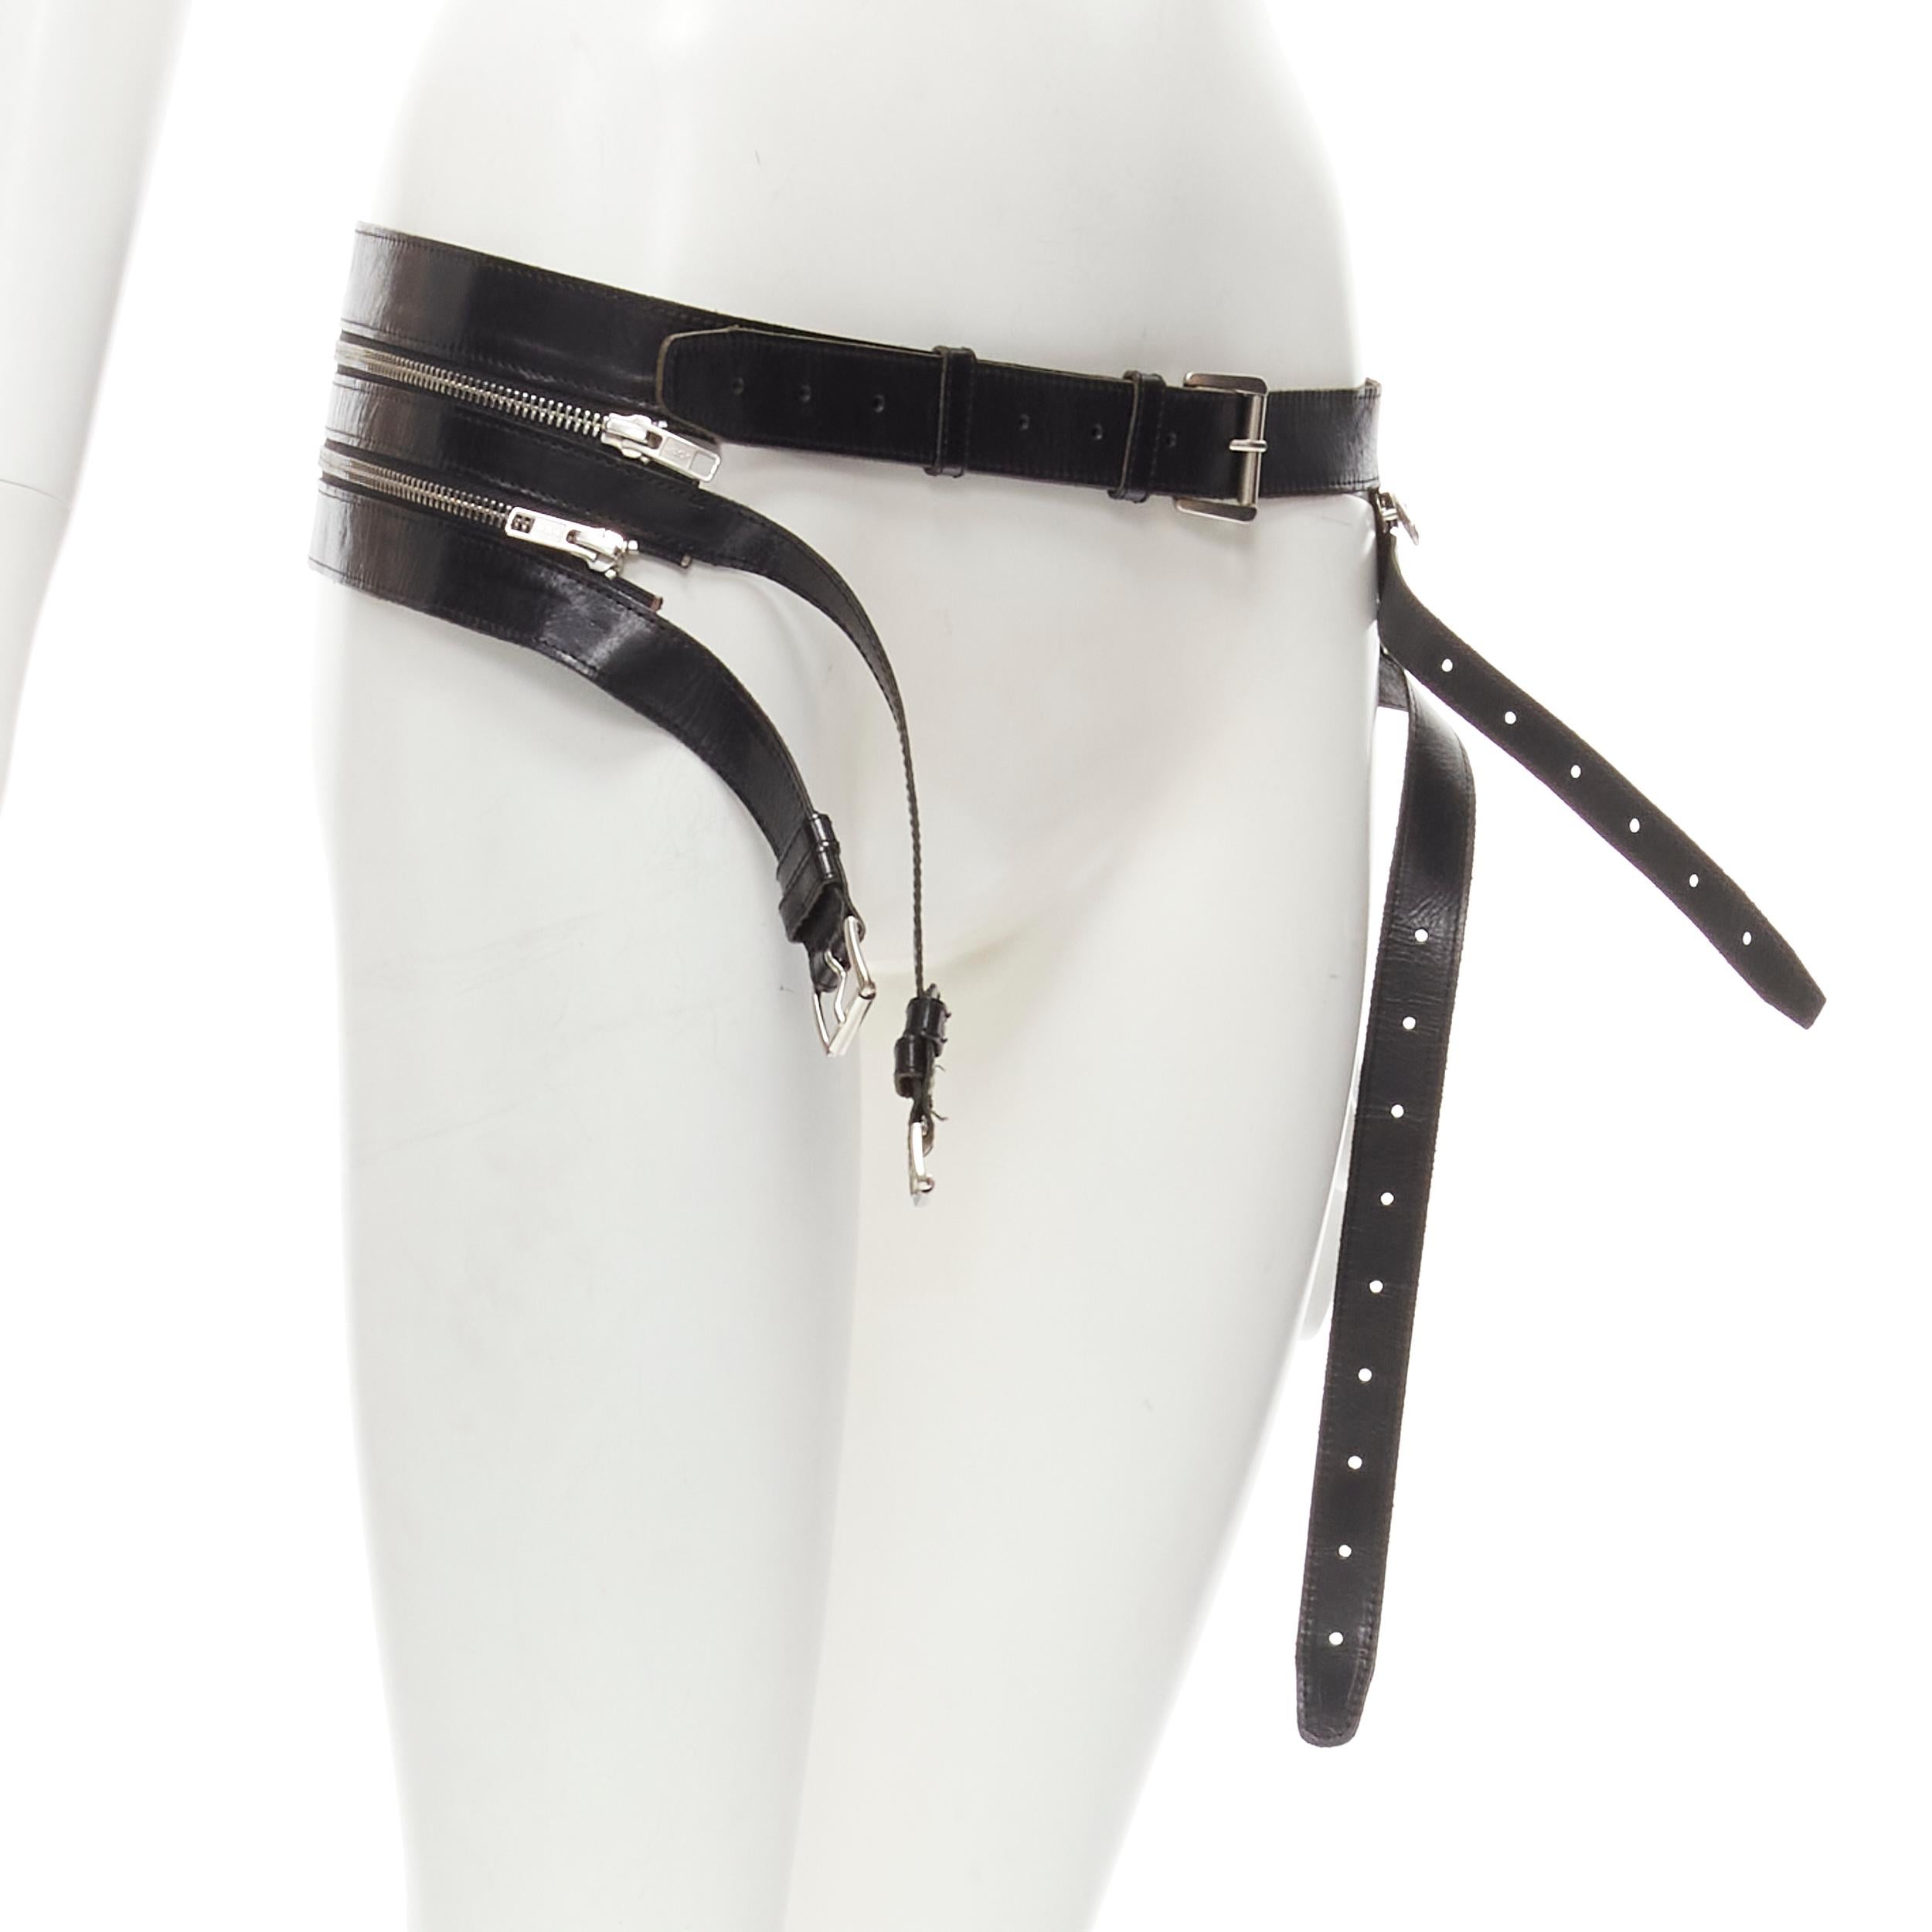 rare ANN DEMEULEMEESTER black leather convertible 3-in-1 wide belt S
Brand: Ann Demeulemeester
Designer: Ann Demeulemeester
Material: Calfskin Leather
Color: Black
Pattern: Solid
Closure: Buckle
Extra Detail: 3-in-1 belt can be worn in multitude of